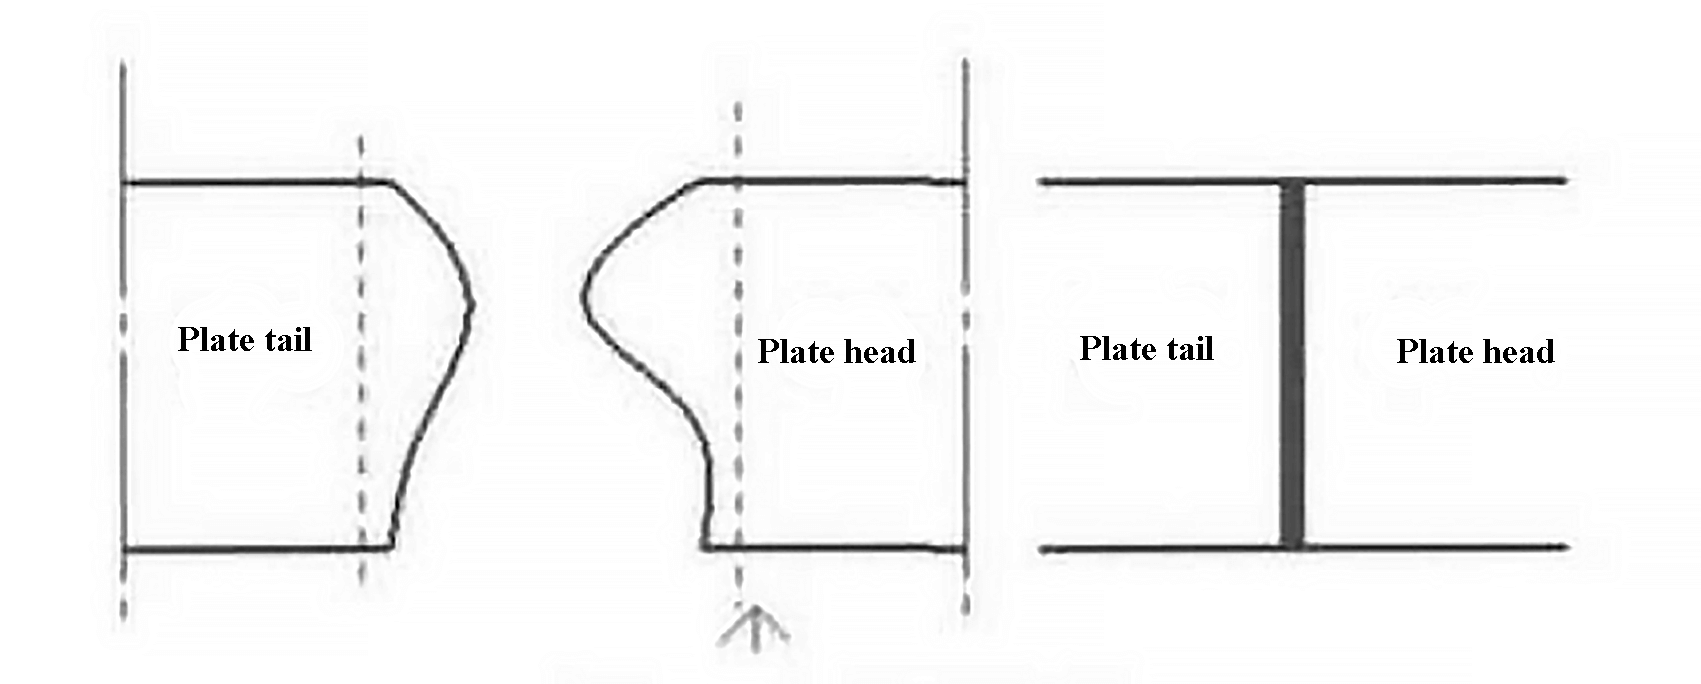 Fig. 1 Schematic diagram of the head